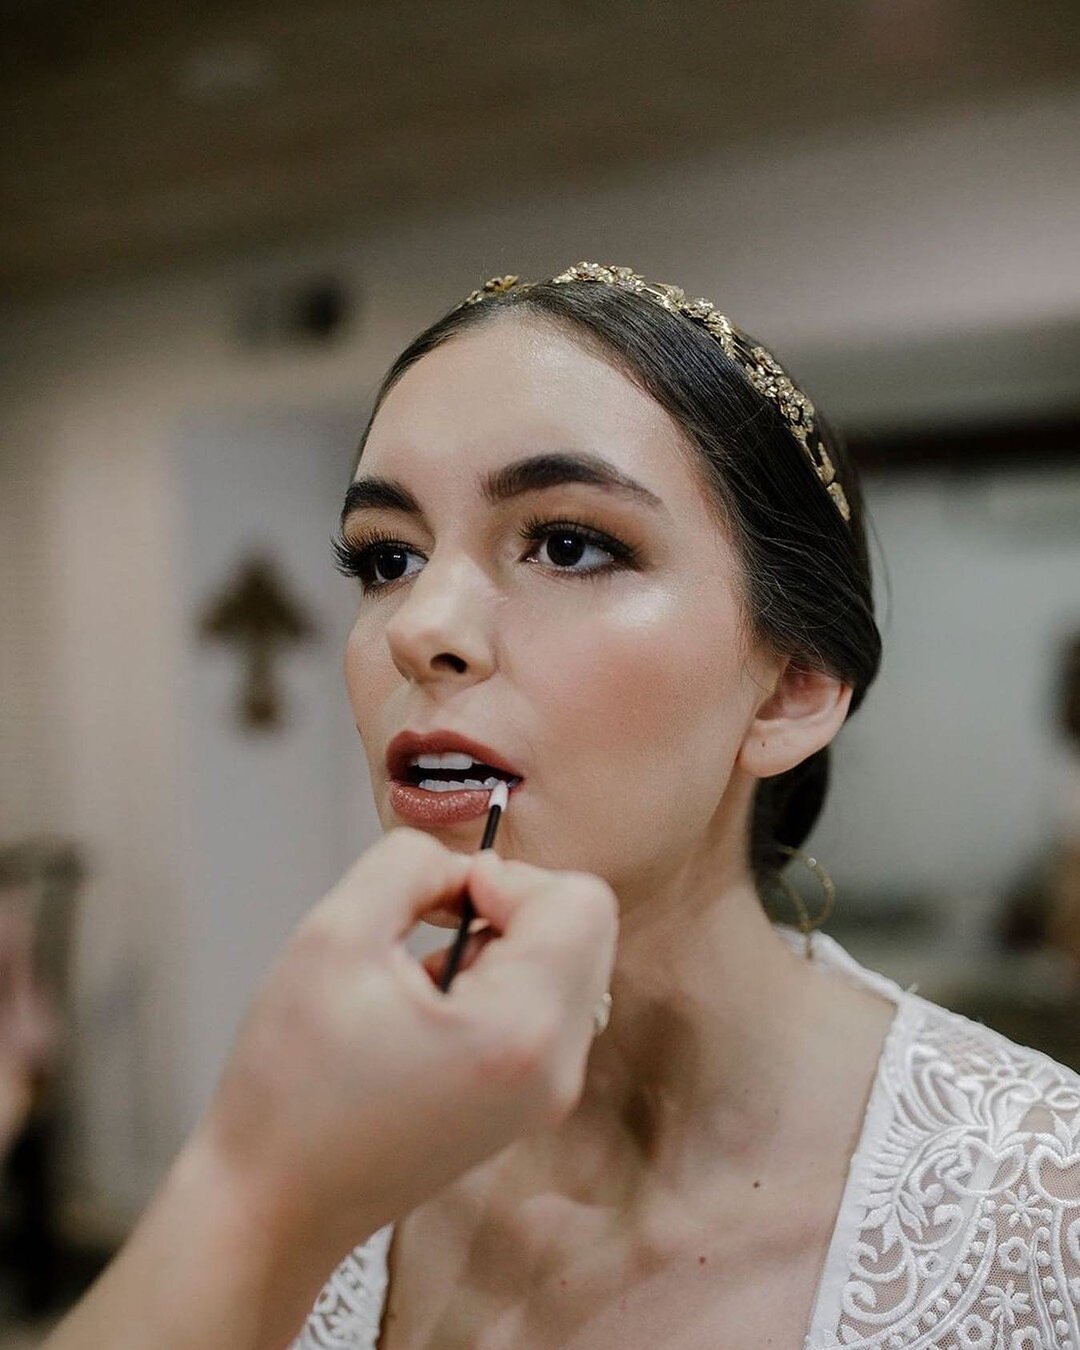 Final touches before her first look. Love this moment captured by @brandisisson! It highlights the thoughtful and seamless detail in Julieta&rsquo;s look.

Photo: @brandisisson
Beauty: @jolieartistryco
Venue: @chotafalls